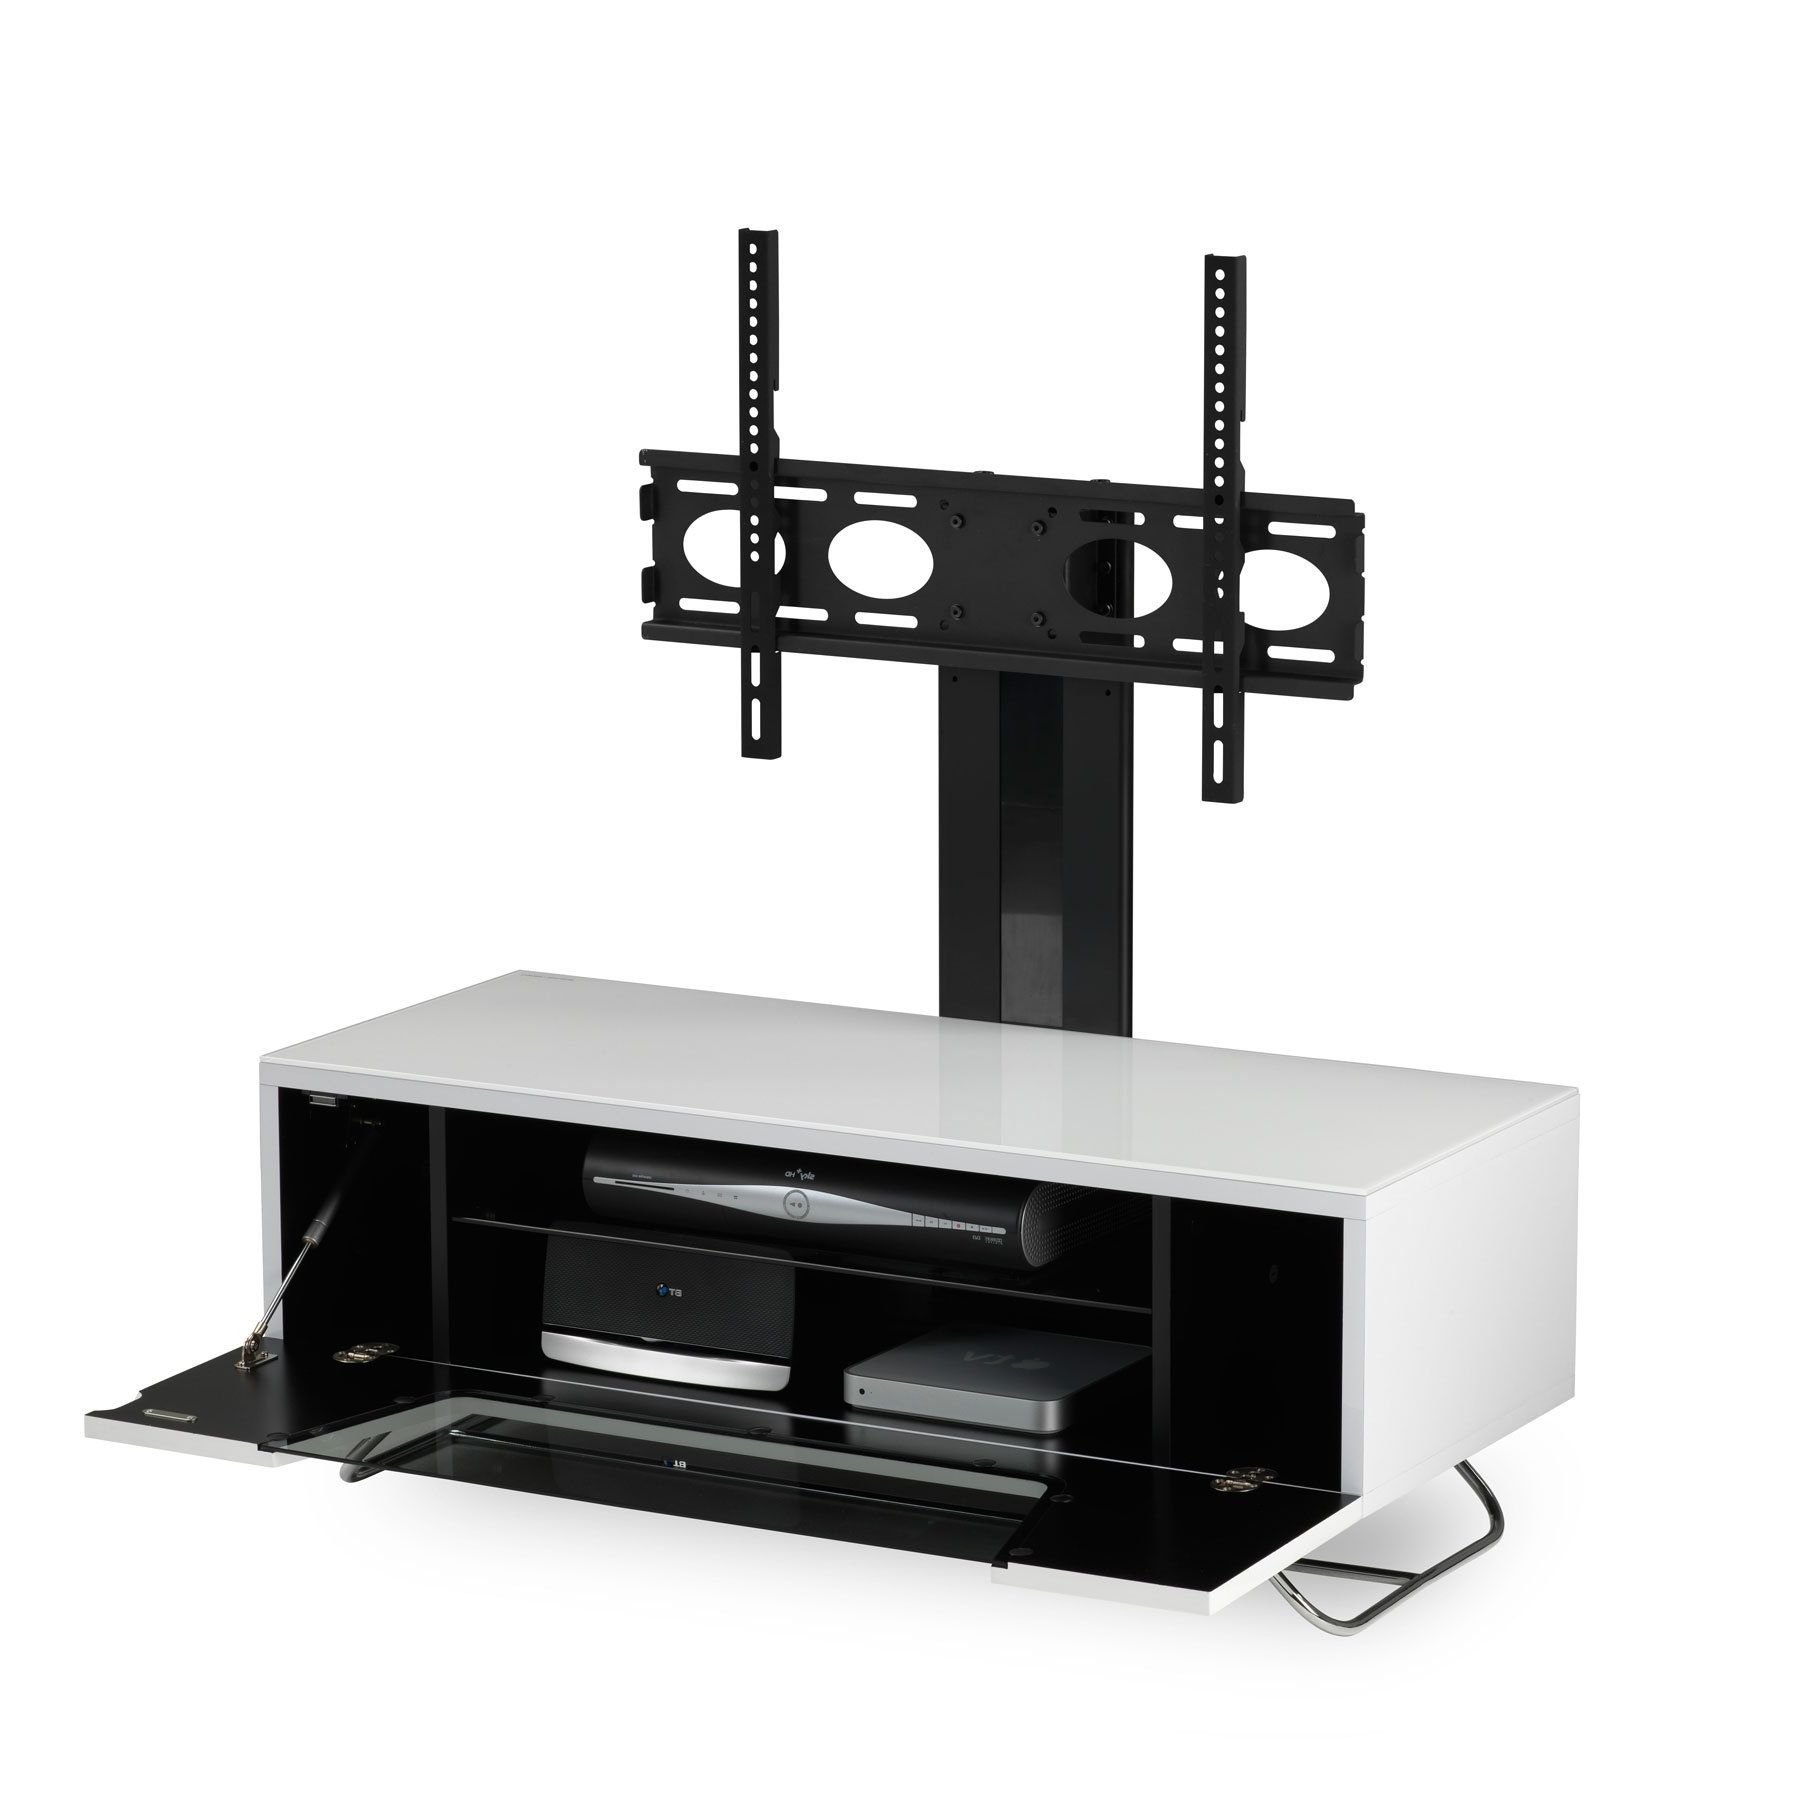 Alphason Chromium 2 100cm White Tv Stand For Up To 50" Tvs Regarding Tv Stands For Tvs Up To 50" (Gallery 12 of 20)